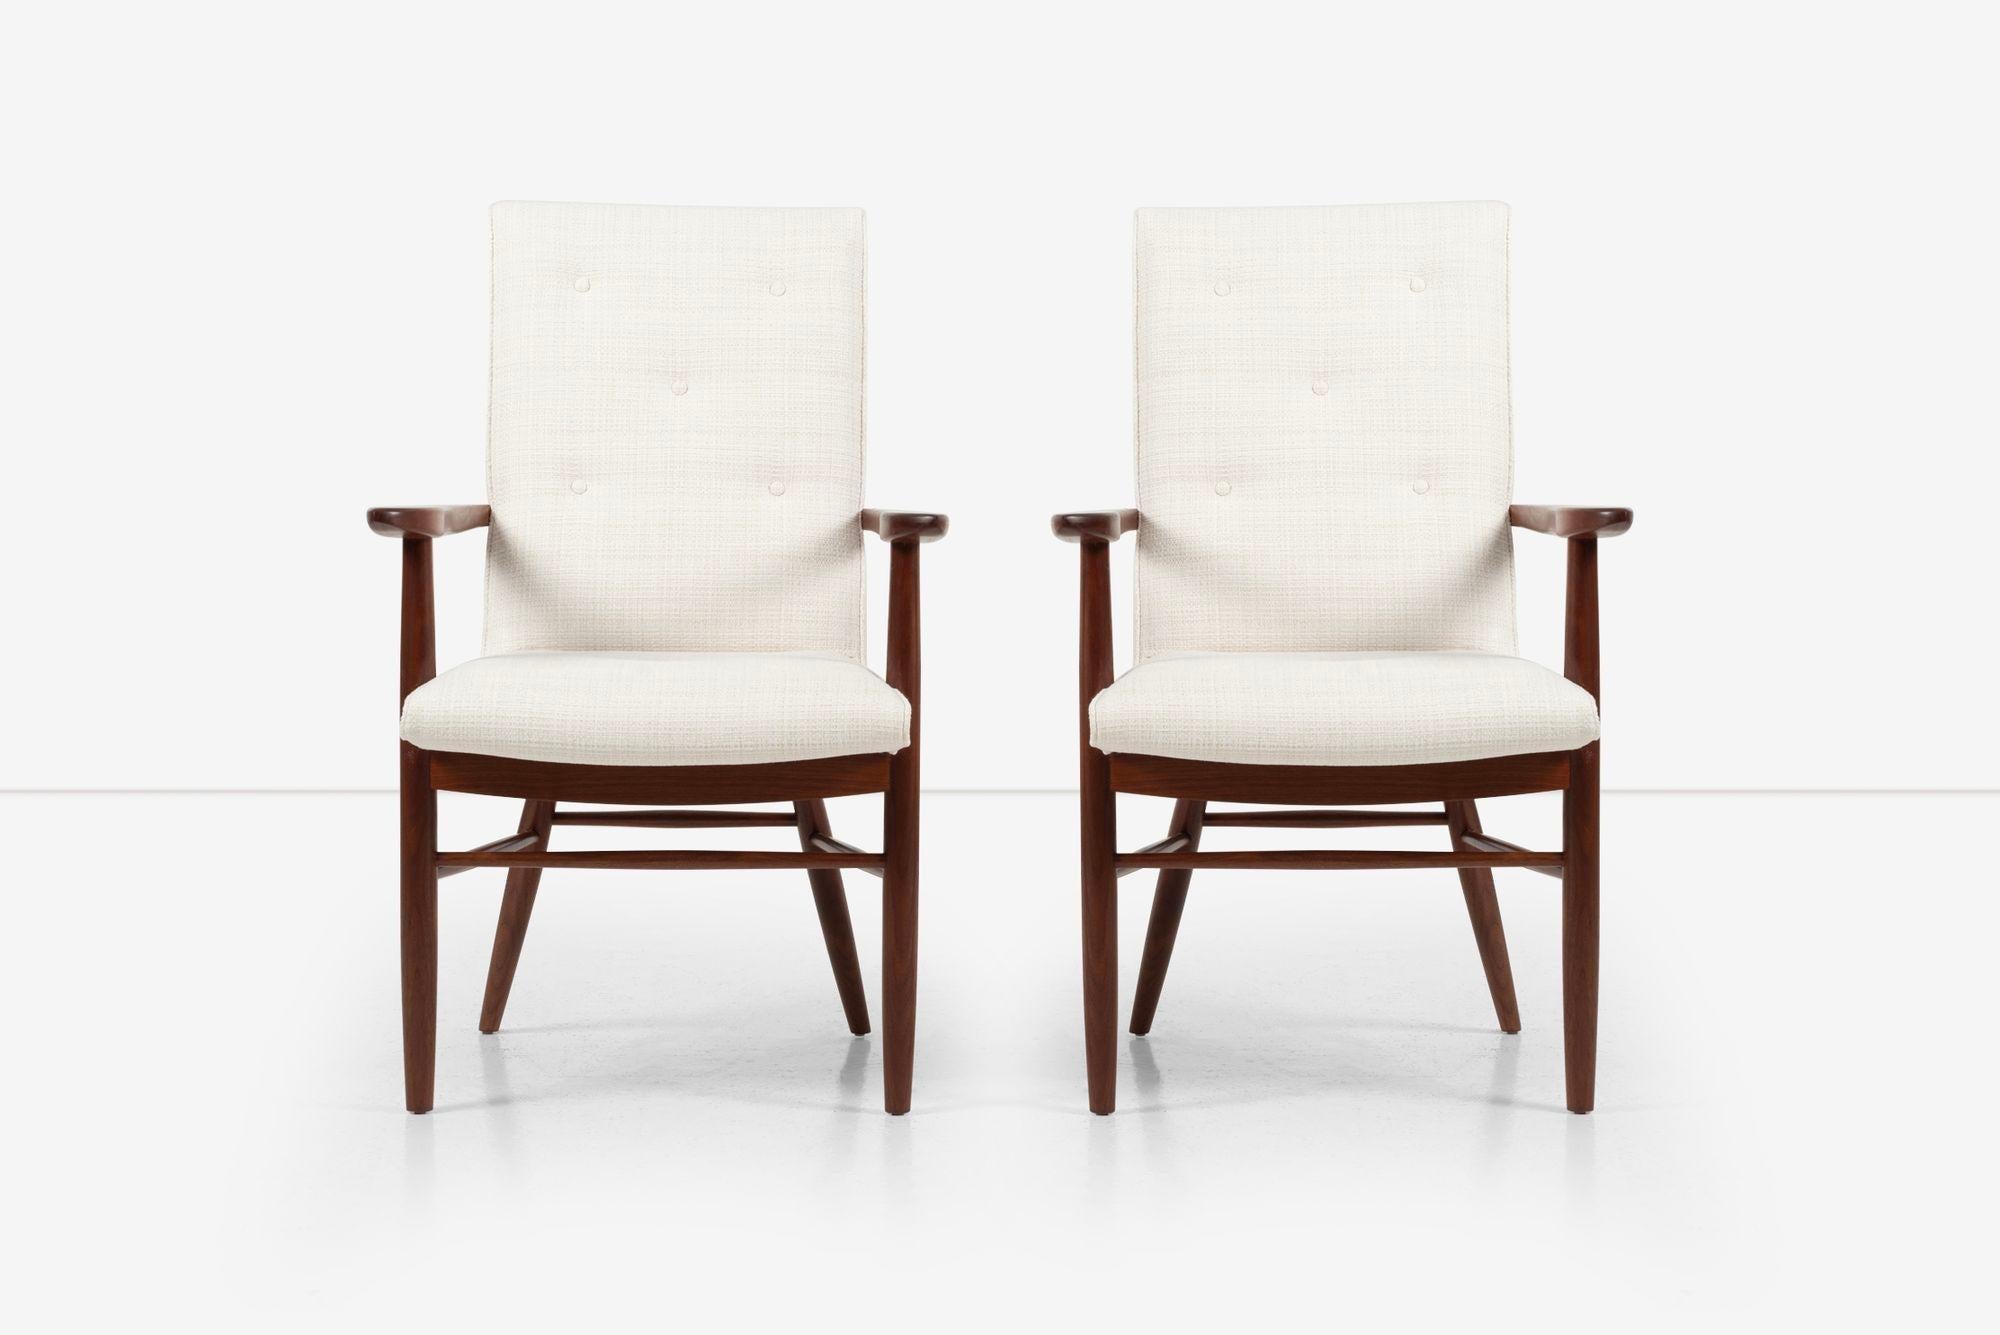 Appliqué George Nakashima Chairs for Widdicomb Origins set of Twelve Dining Chairs For Sale